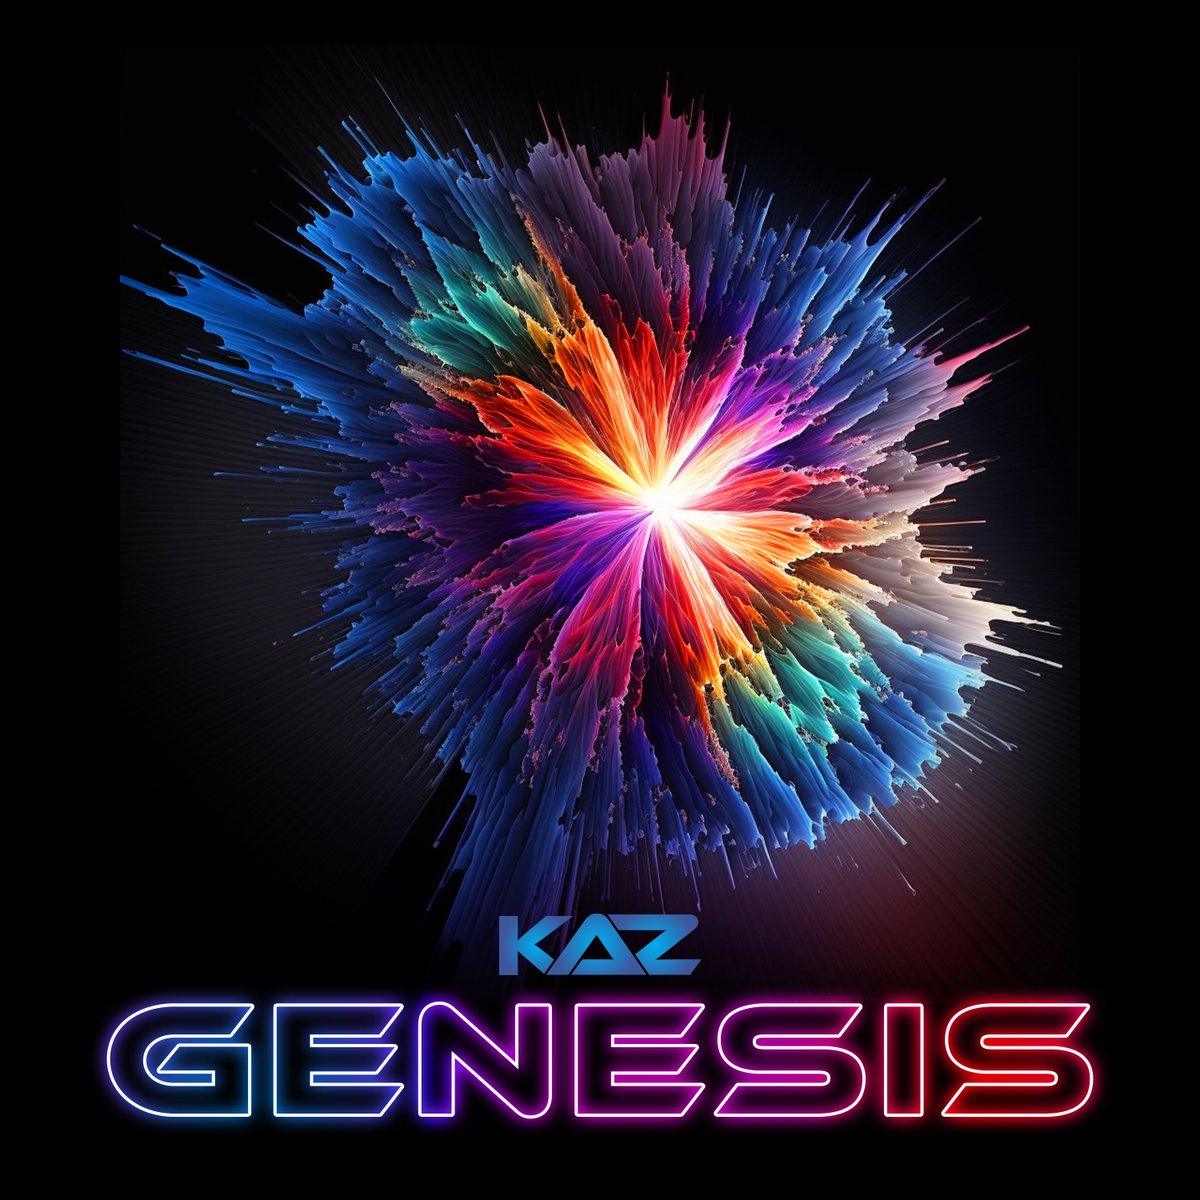 My new release Genesis is OUT NOW on all major platforms. Powered by @dittomusic. ditto.fm/genesis-kaz
 #trancemusic #techno #tranceclassic #trance